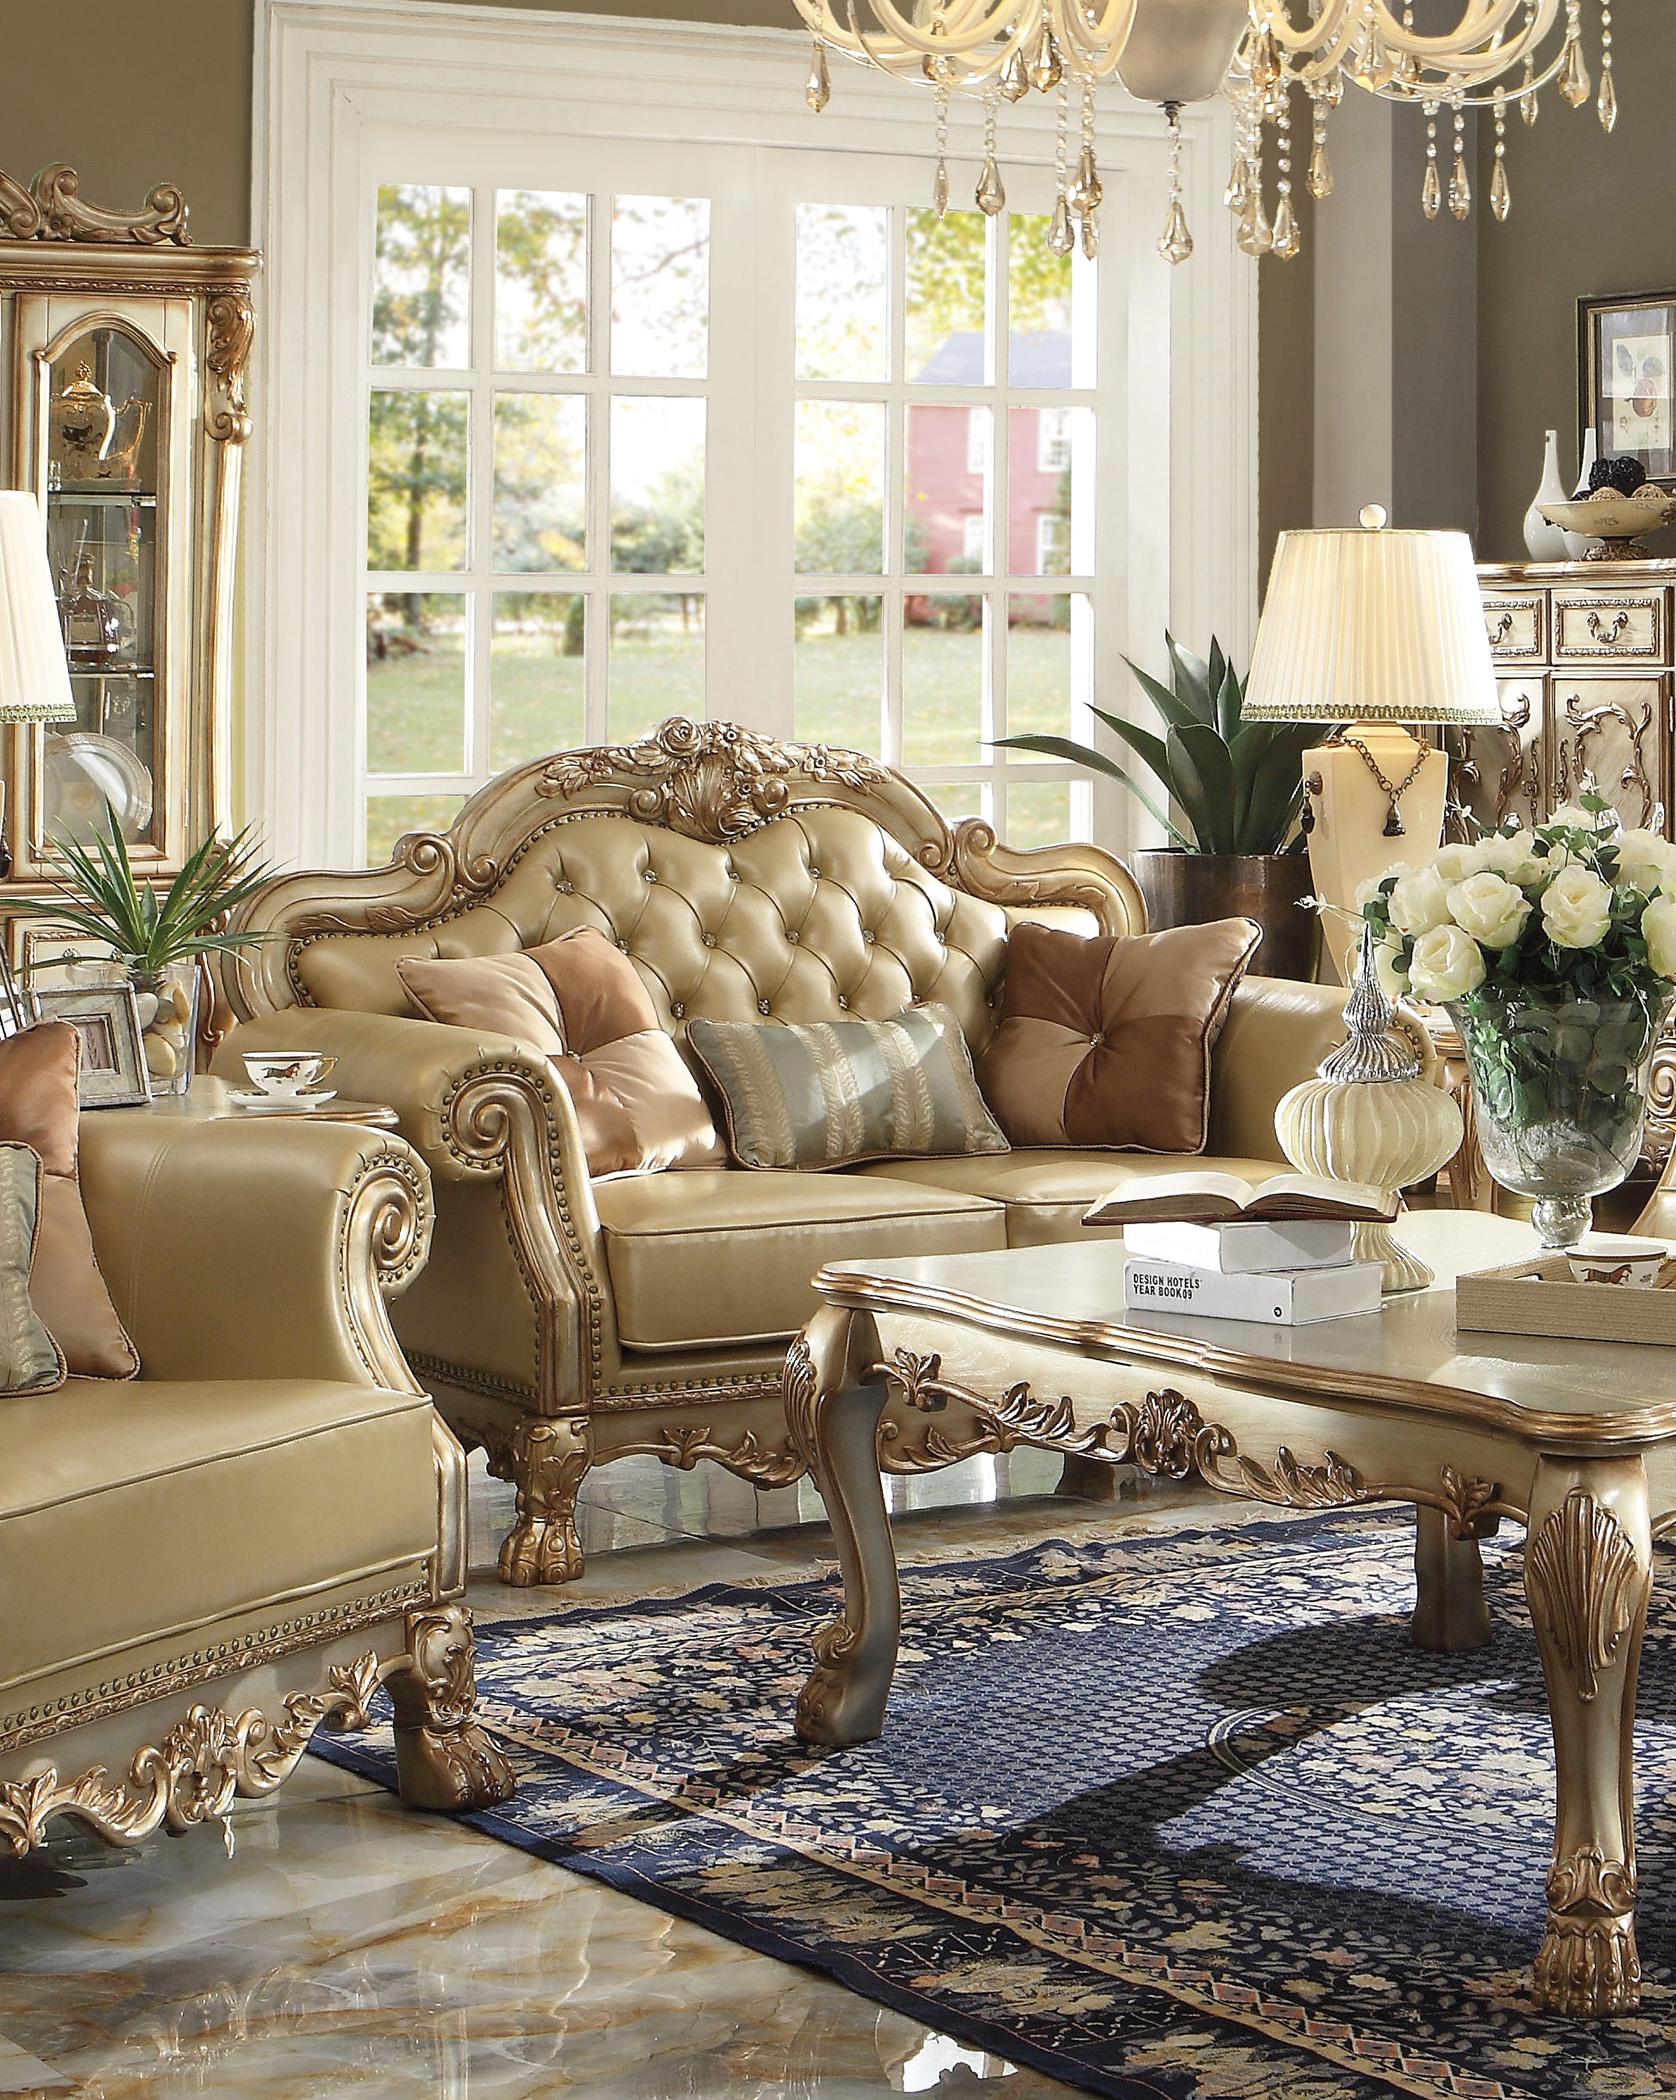 Traditional,  Vintage Loveseat Dresden-53161 Dresden-53161 in Bone, Patina, Gold Faux Leather